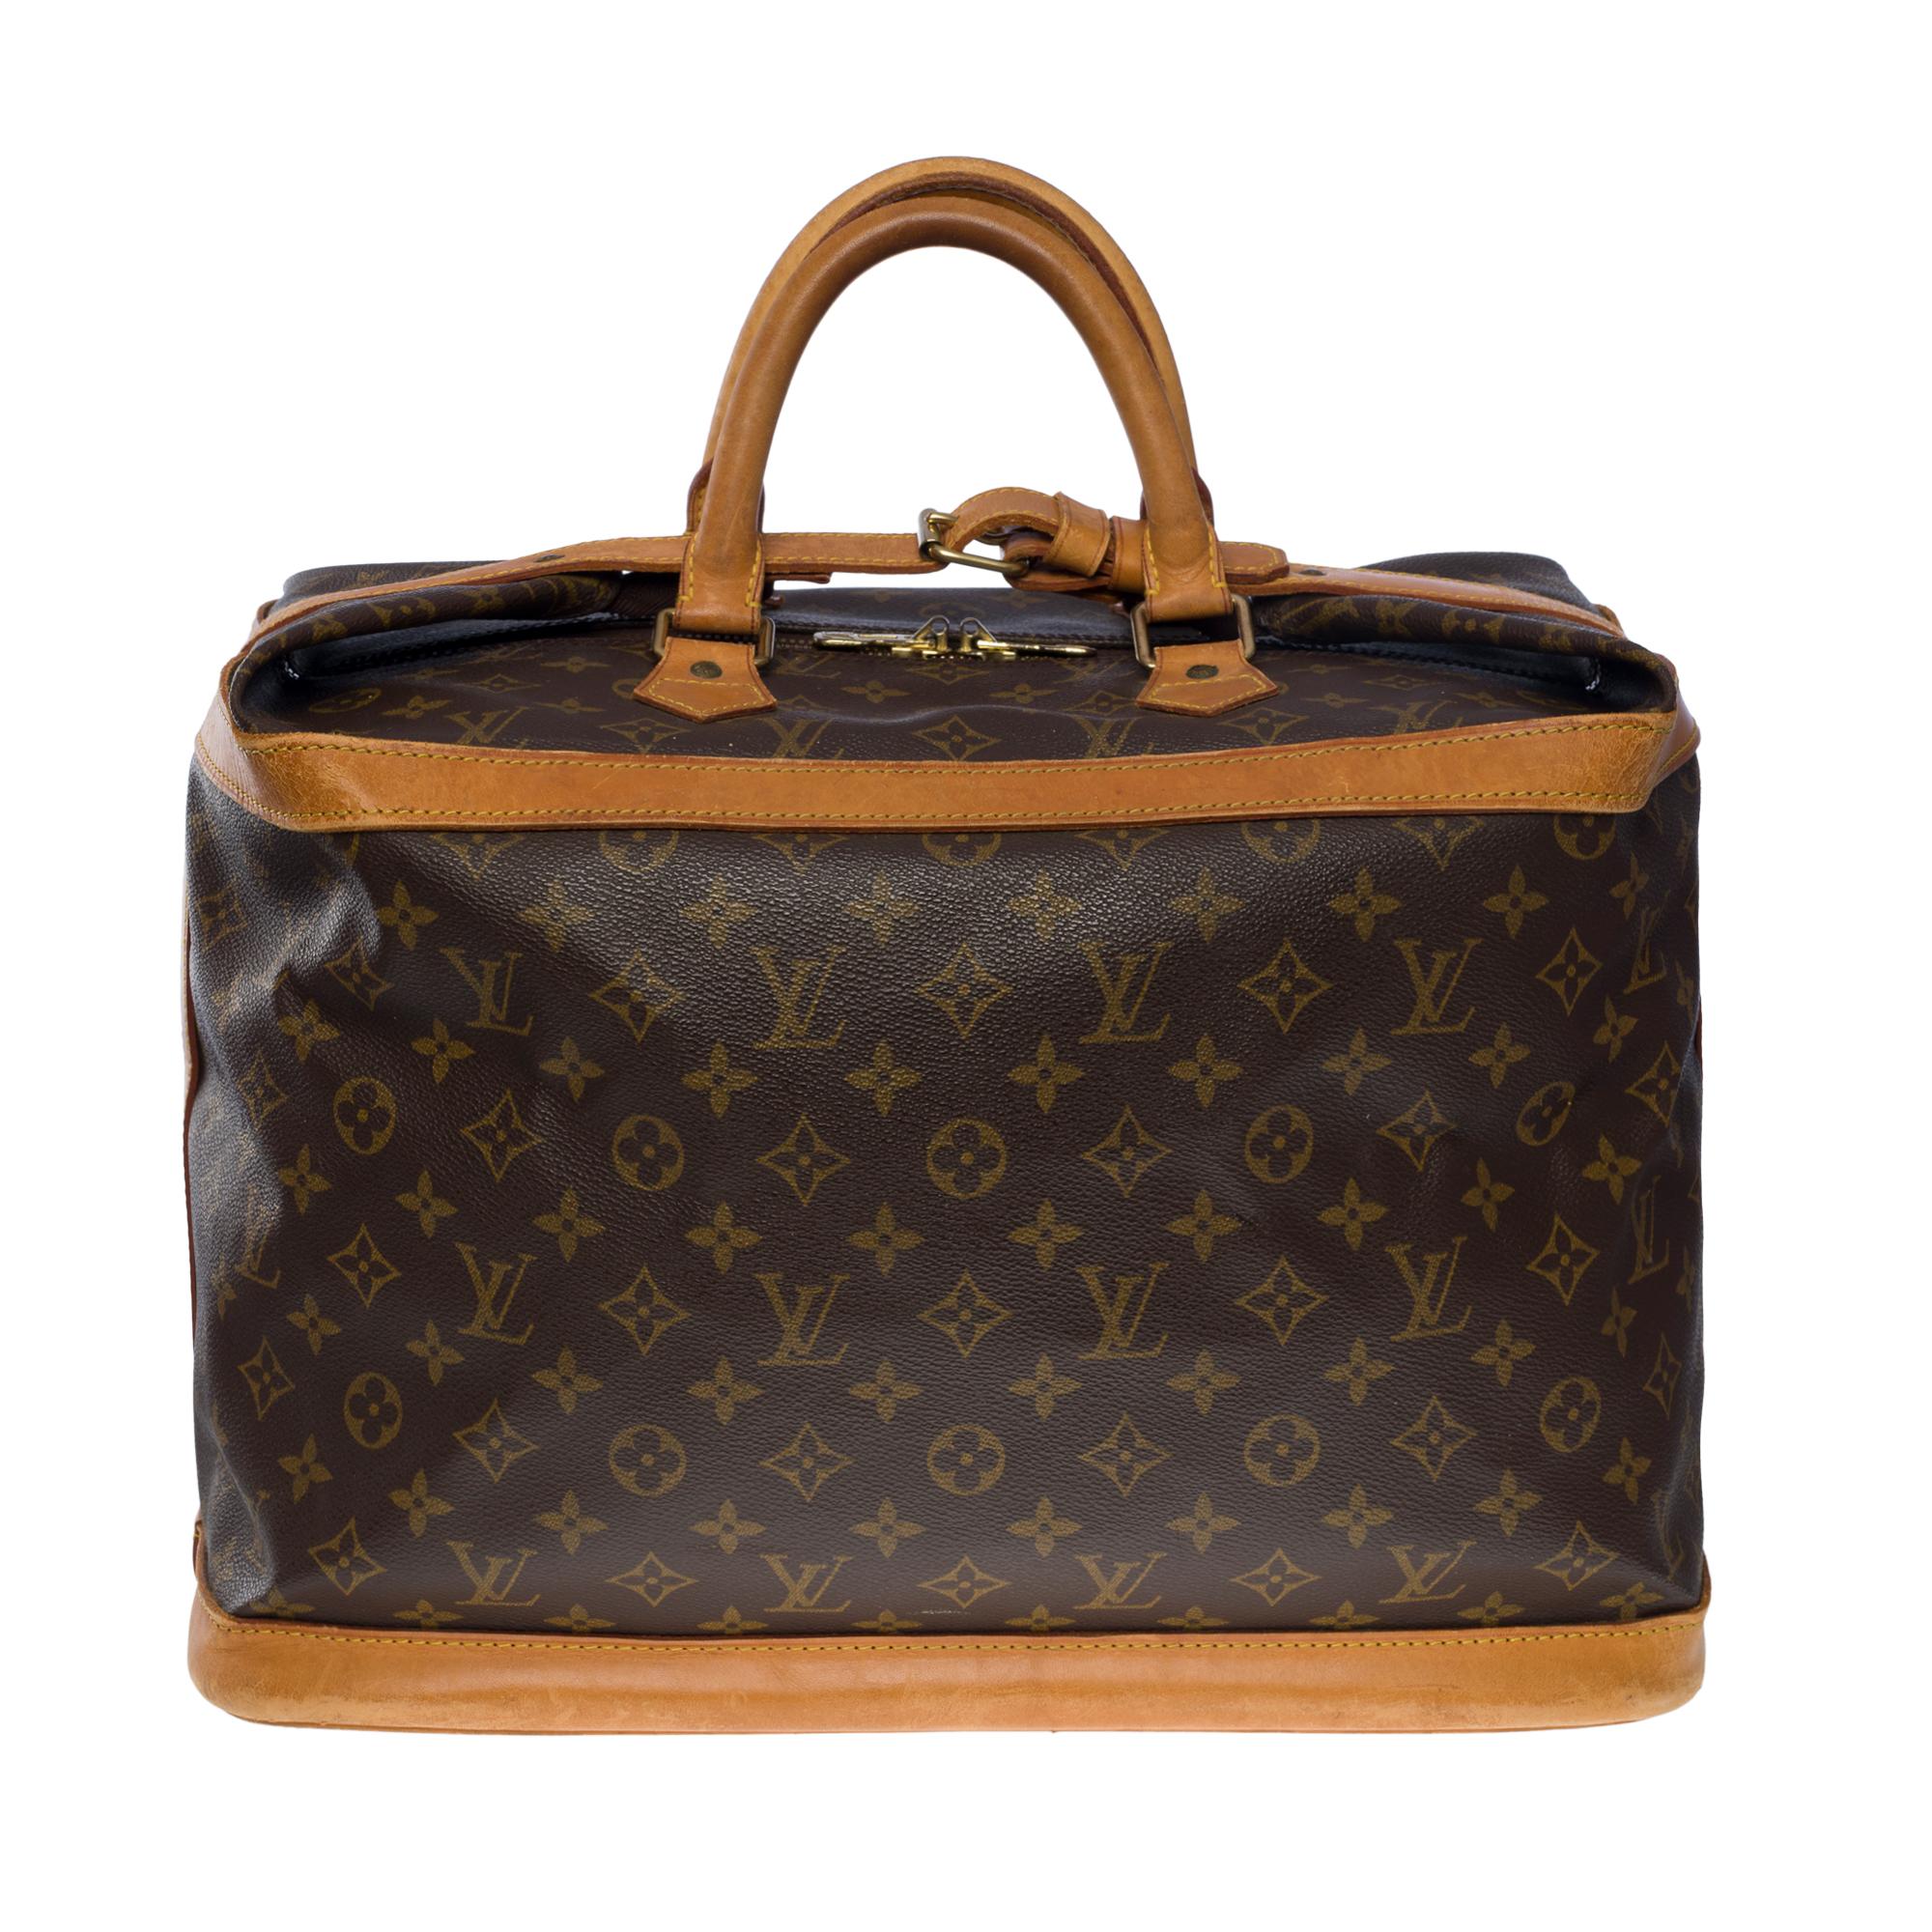 Beautiful Louis Vuitton Cruiser 40 Travel bag in monogram coated canvas, gold metal hardware
Central zip closure on top and leather strap
Beige leather handles
Brown canvas interior
5 feet of gold metal base
Signature: 